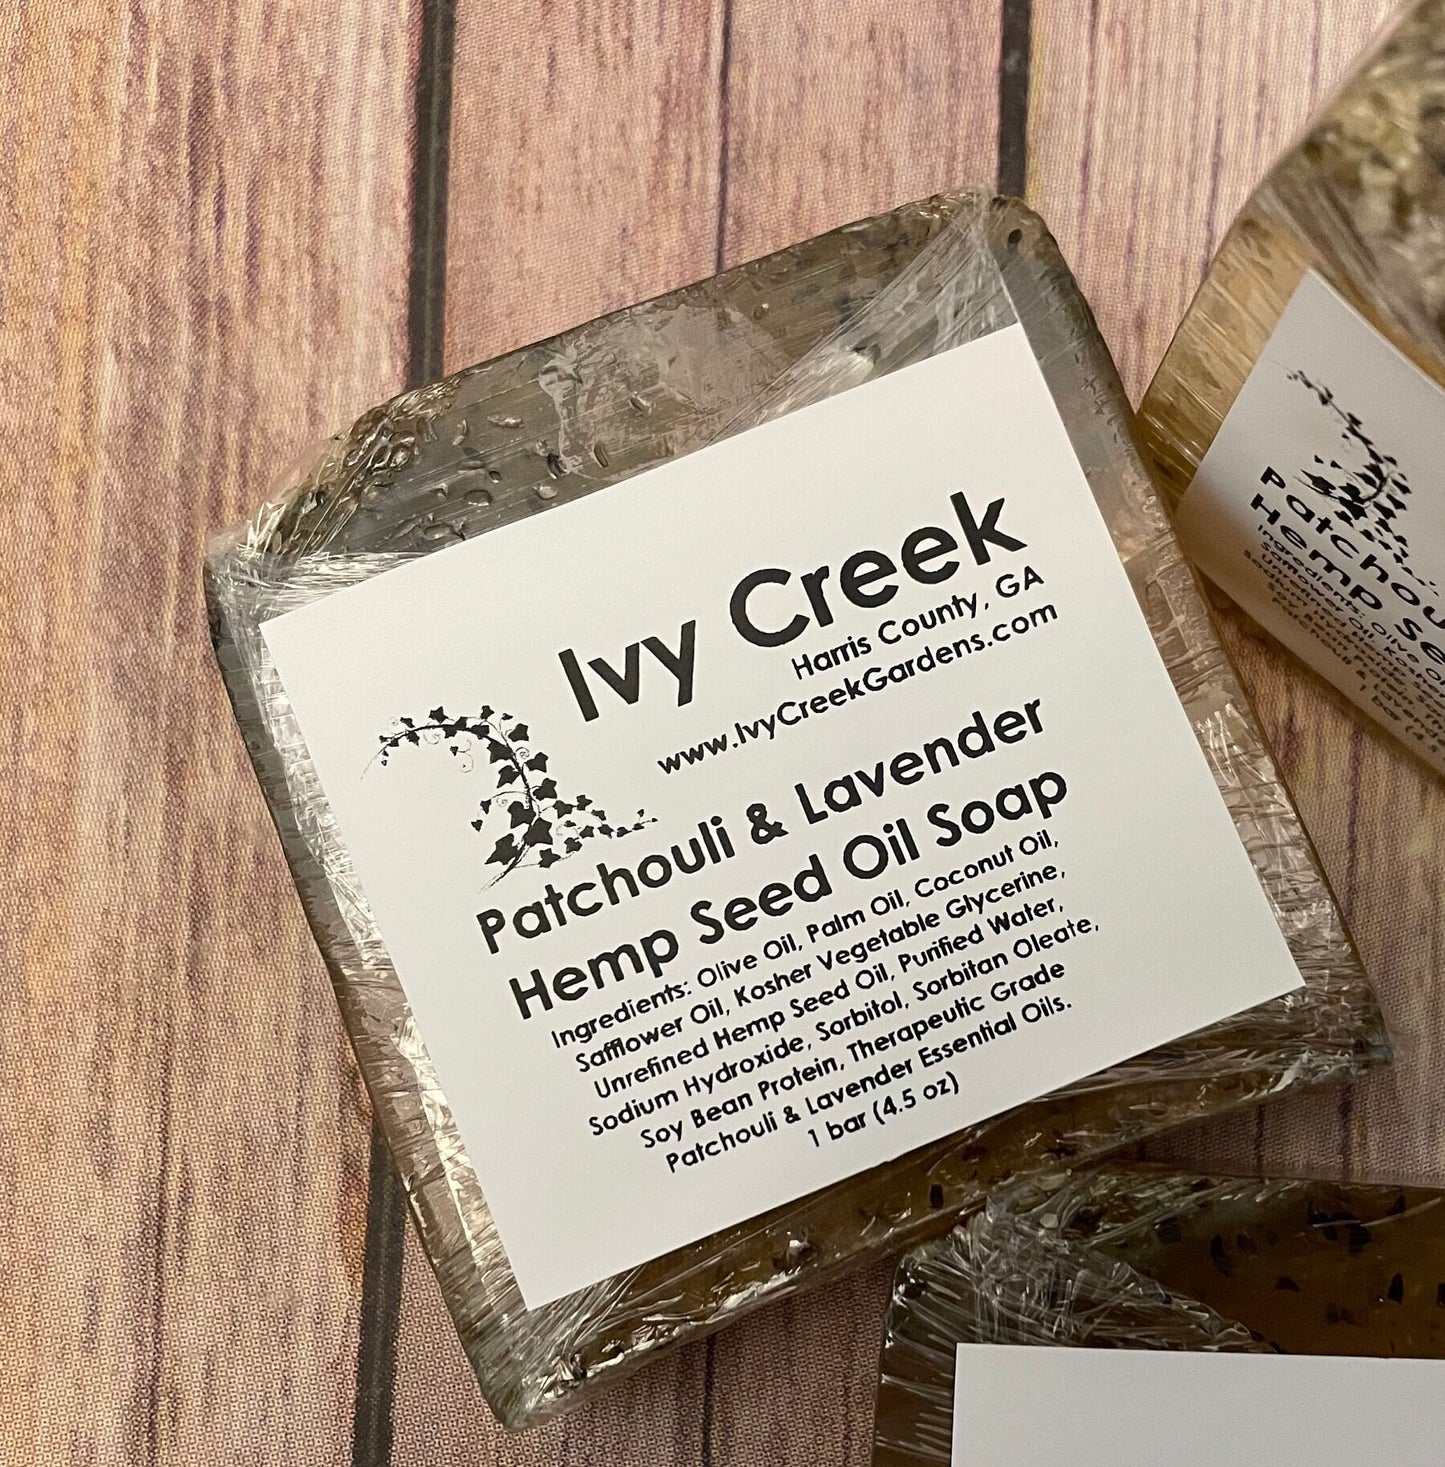 Ivy Creek Hemp Seed Oil Soap | Patchouli & Lavender Hemp Seed Oil Soap | Patchouli Soap | Lavender Soap | Natural | Therapeutic | 4.5 oz bar